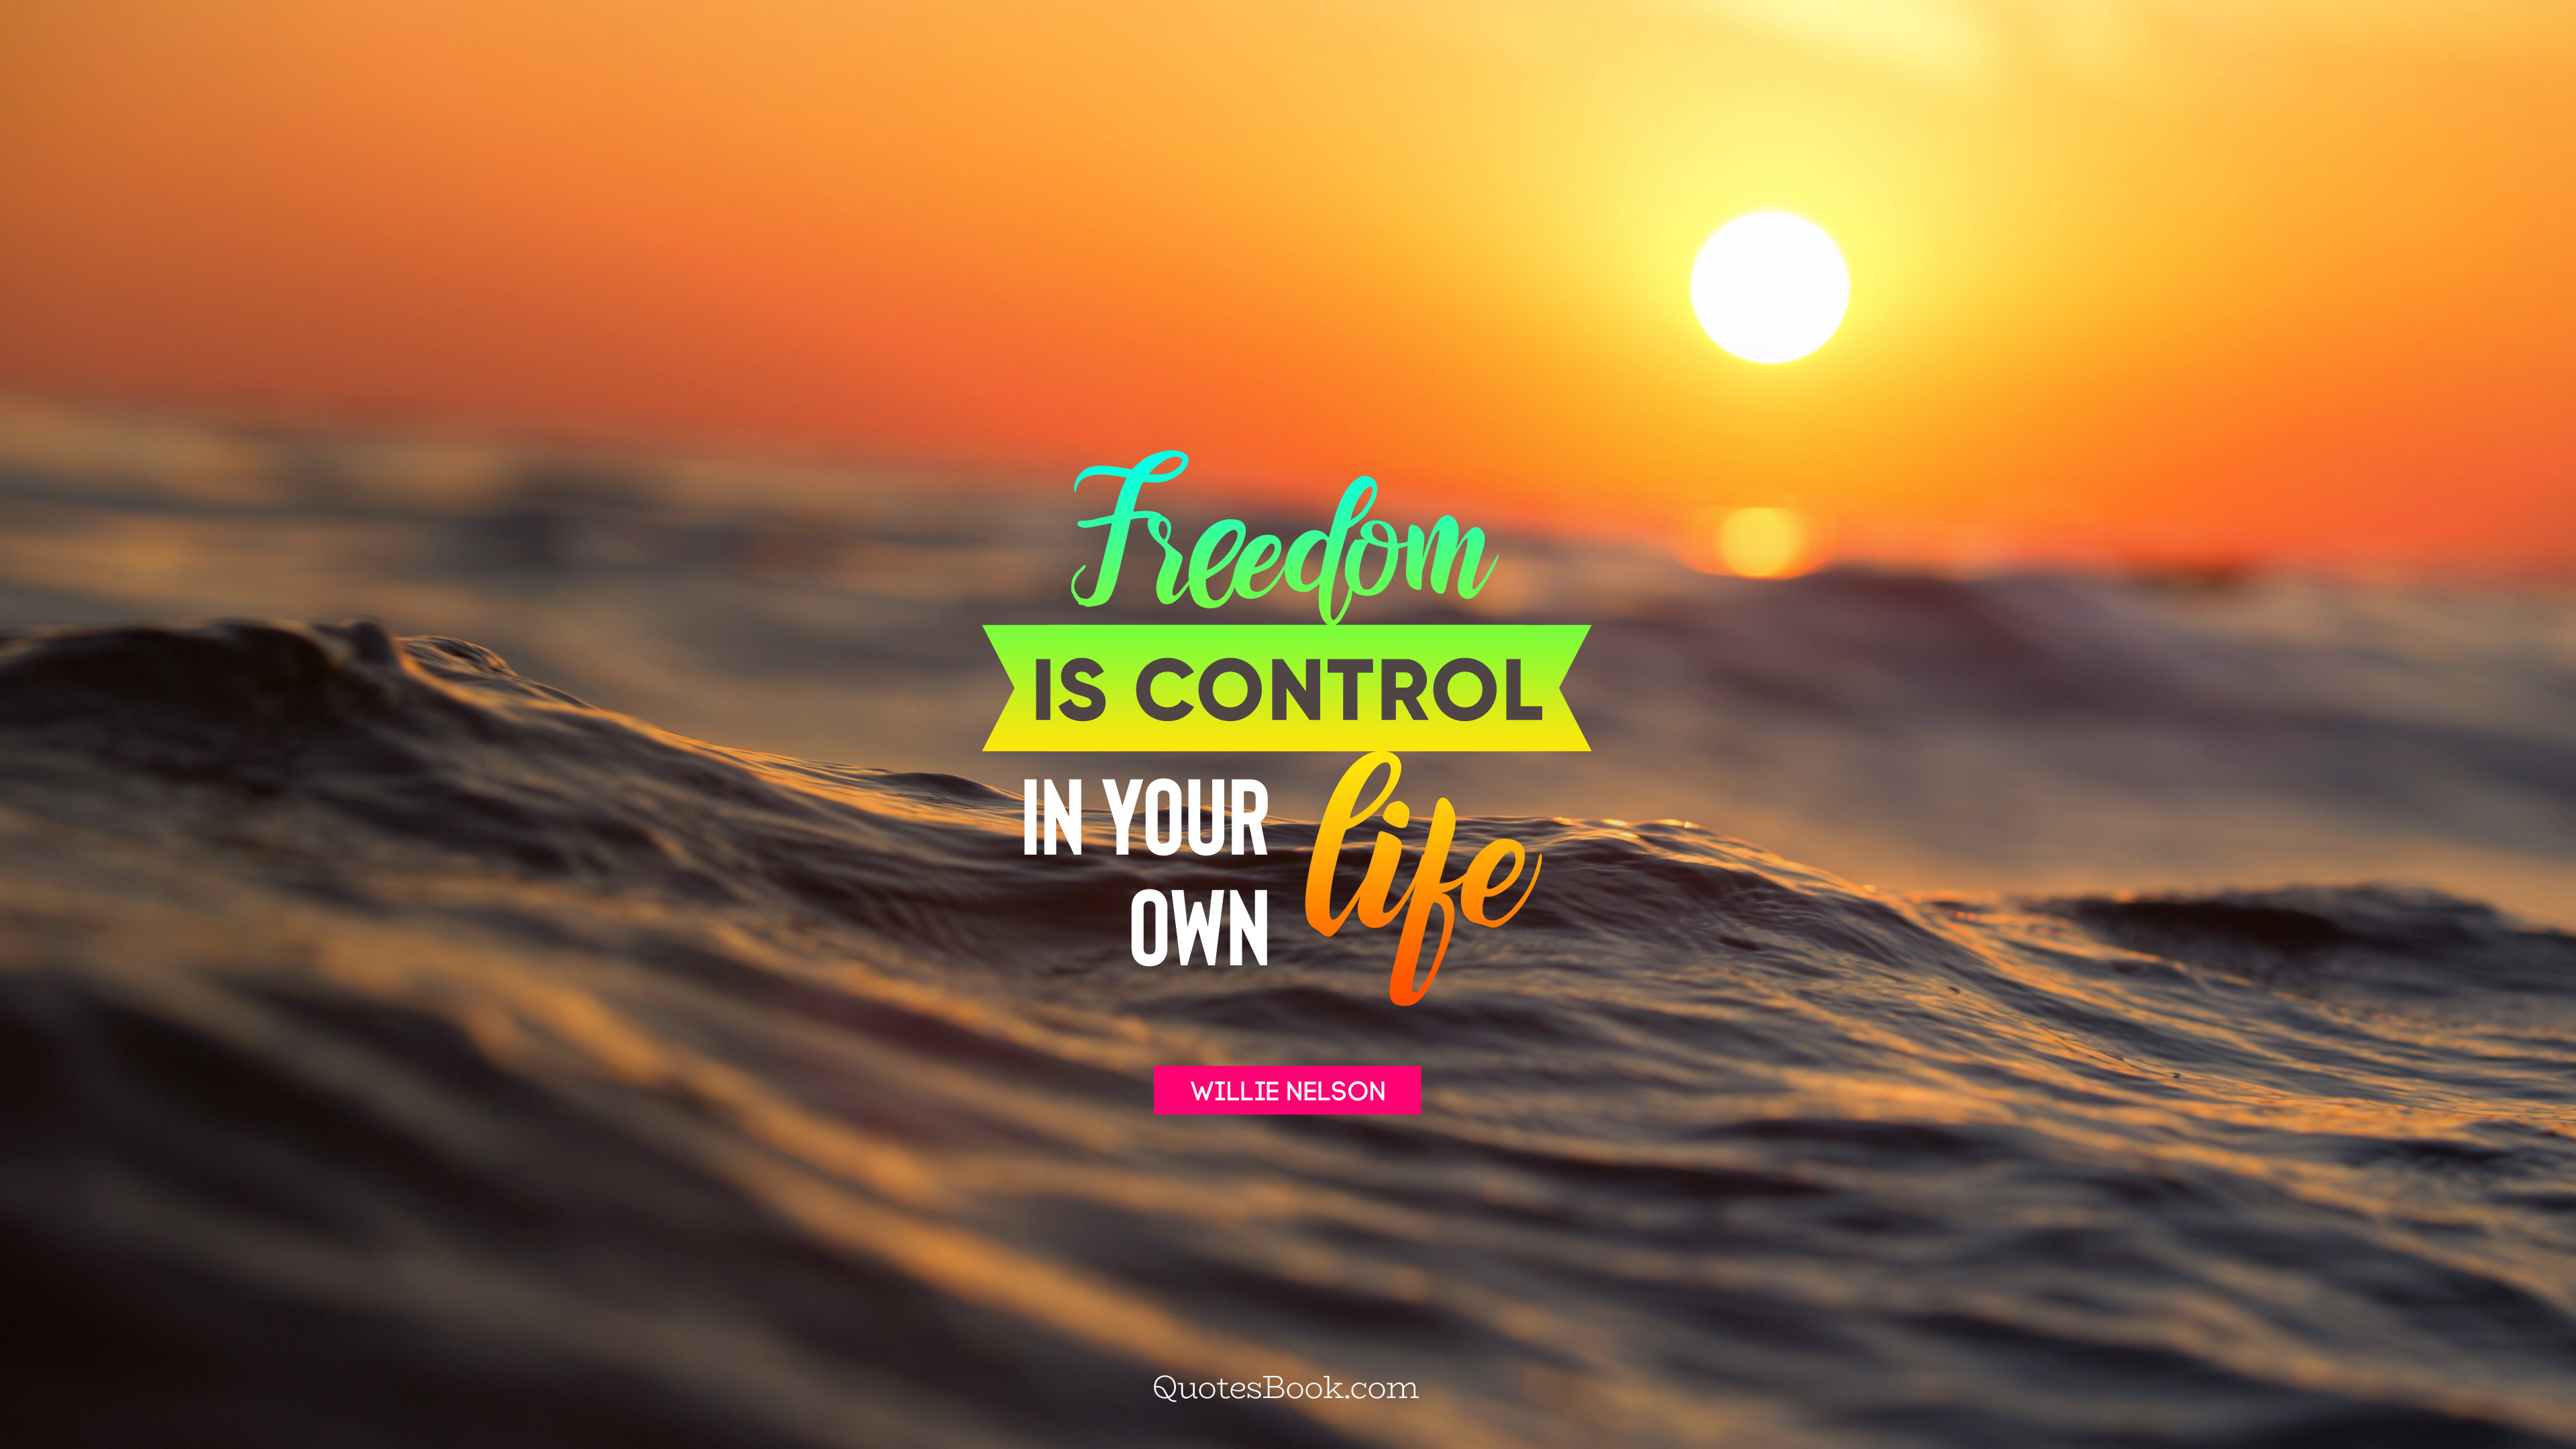 Freedom is control in your own life. - Quote by Willie Nelson - QuotesBook